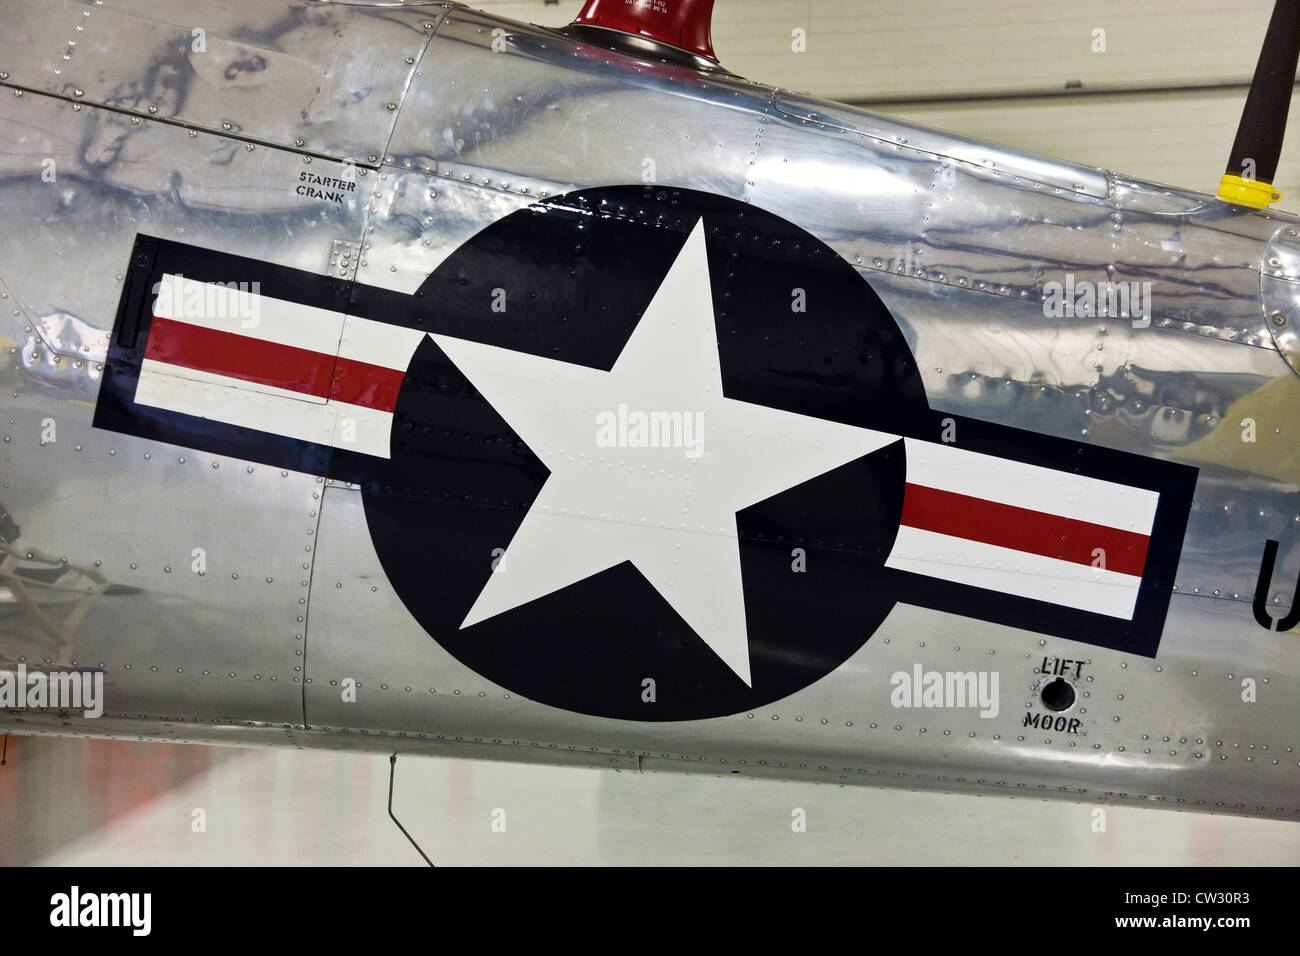 US Navy military aircraft logo roundel on side restored North American T-6 Texan advanced trainer used to train fighter pilots Stock Photo